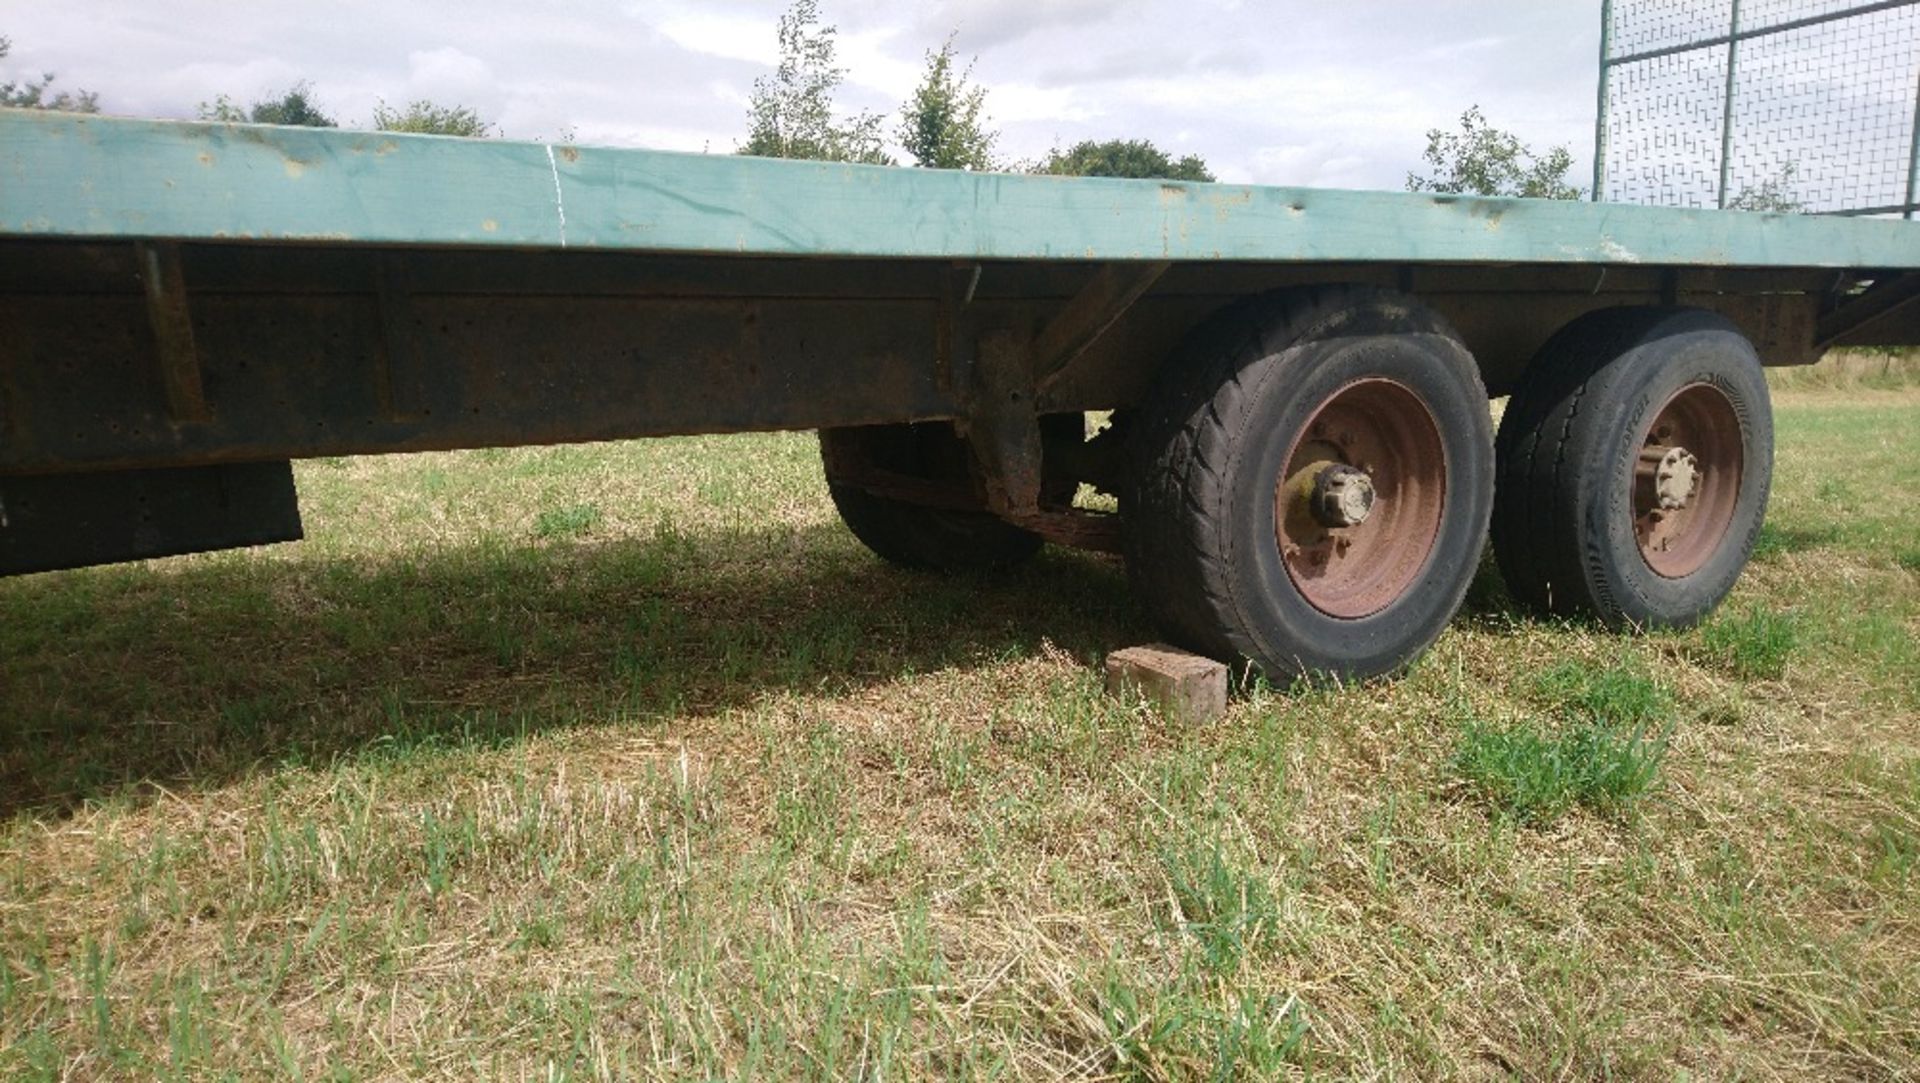 Flat bed trailer, 8m x 2.4m bed 1.3 off ground. Stored near Palgrave, Suffolk. - Image 3 of 5